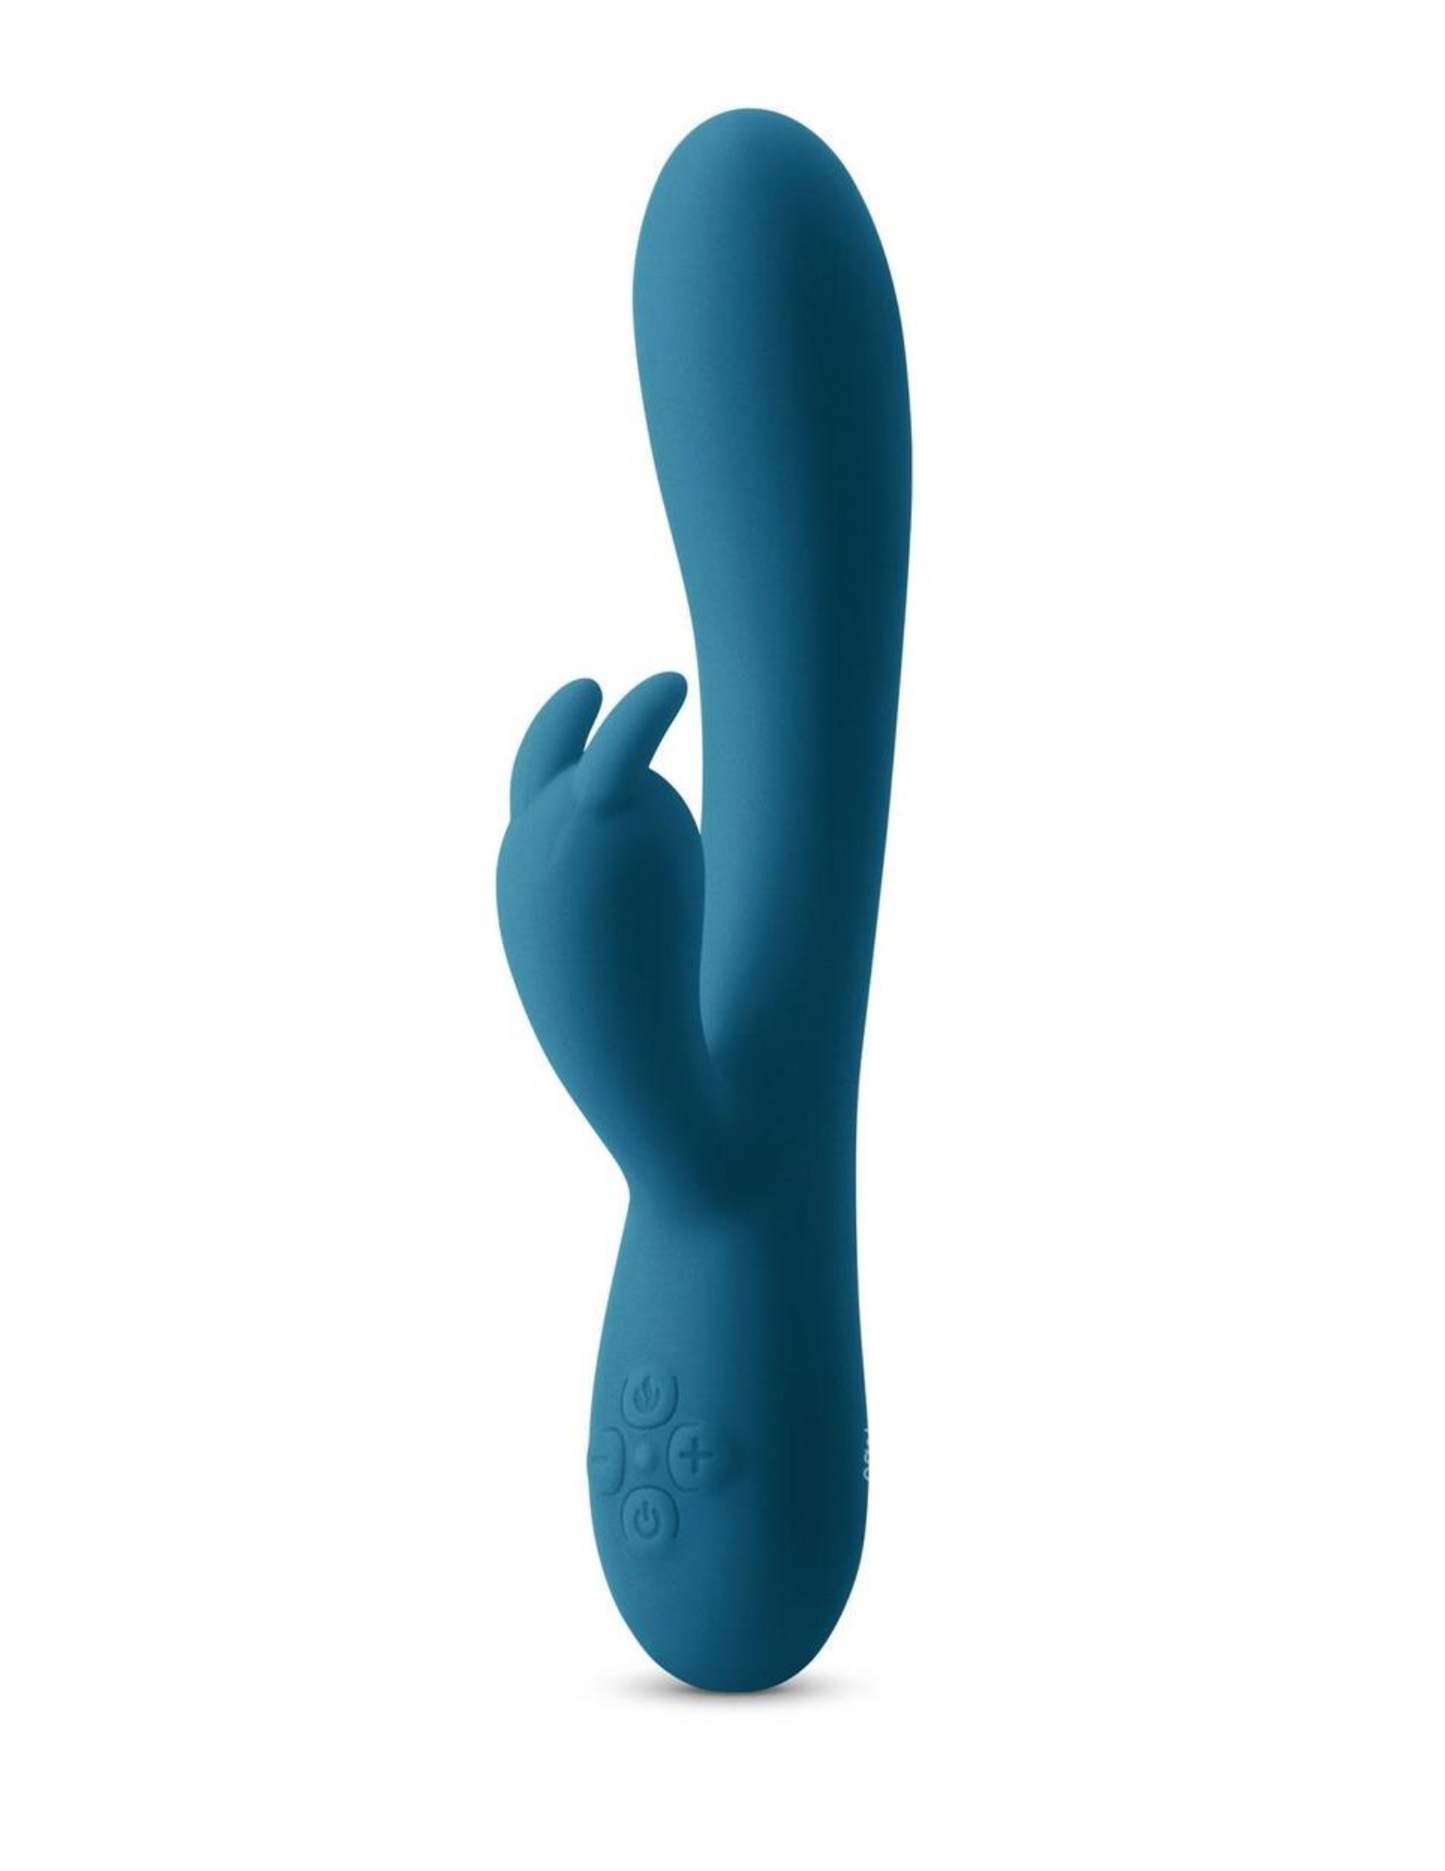 Photo of the Inya Luv Bunny (teal) from NS Novelties shows off its power and control buttons, as well as kits bunny shaped clit stimulator.